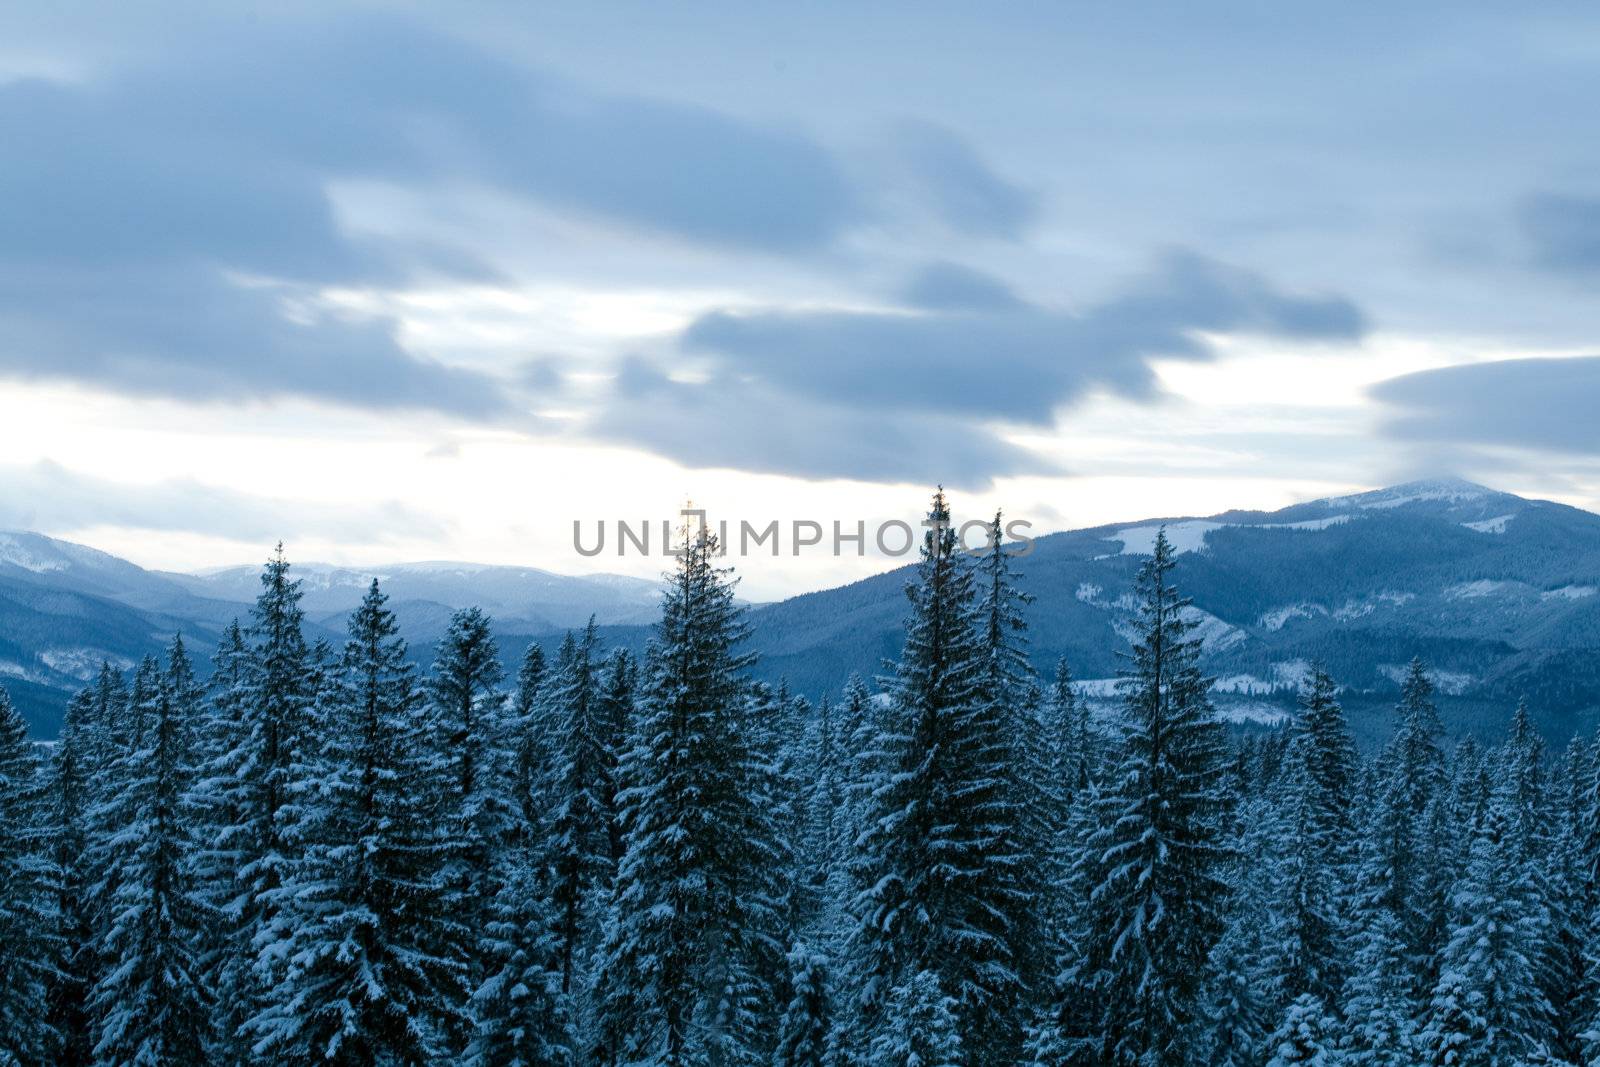 An image of winter in the mountains